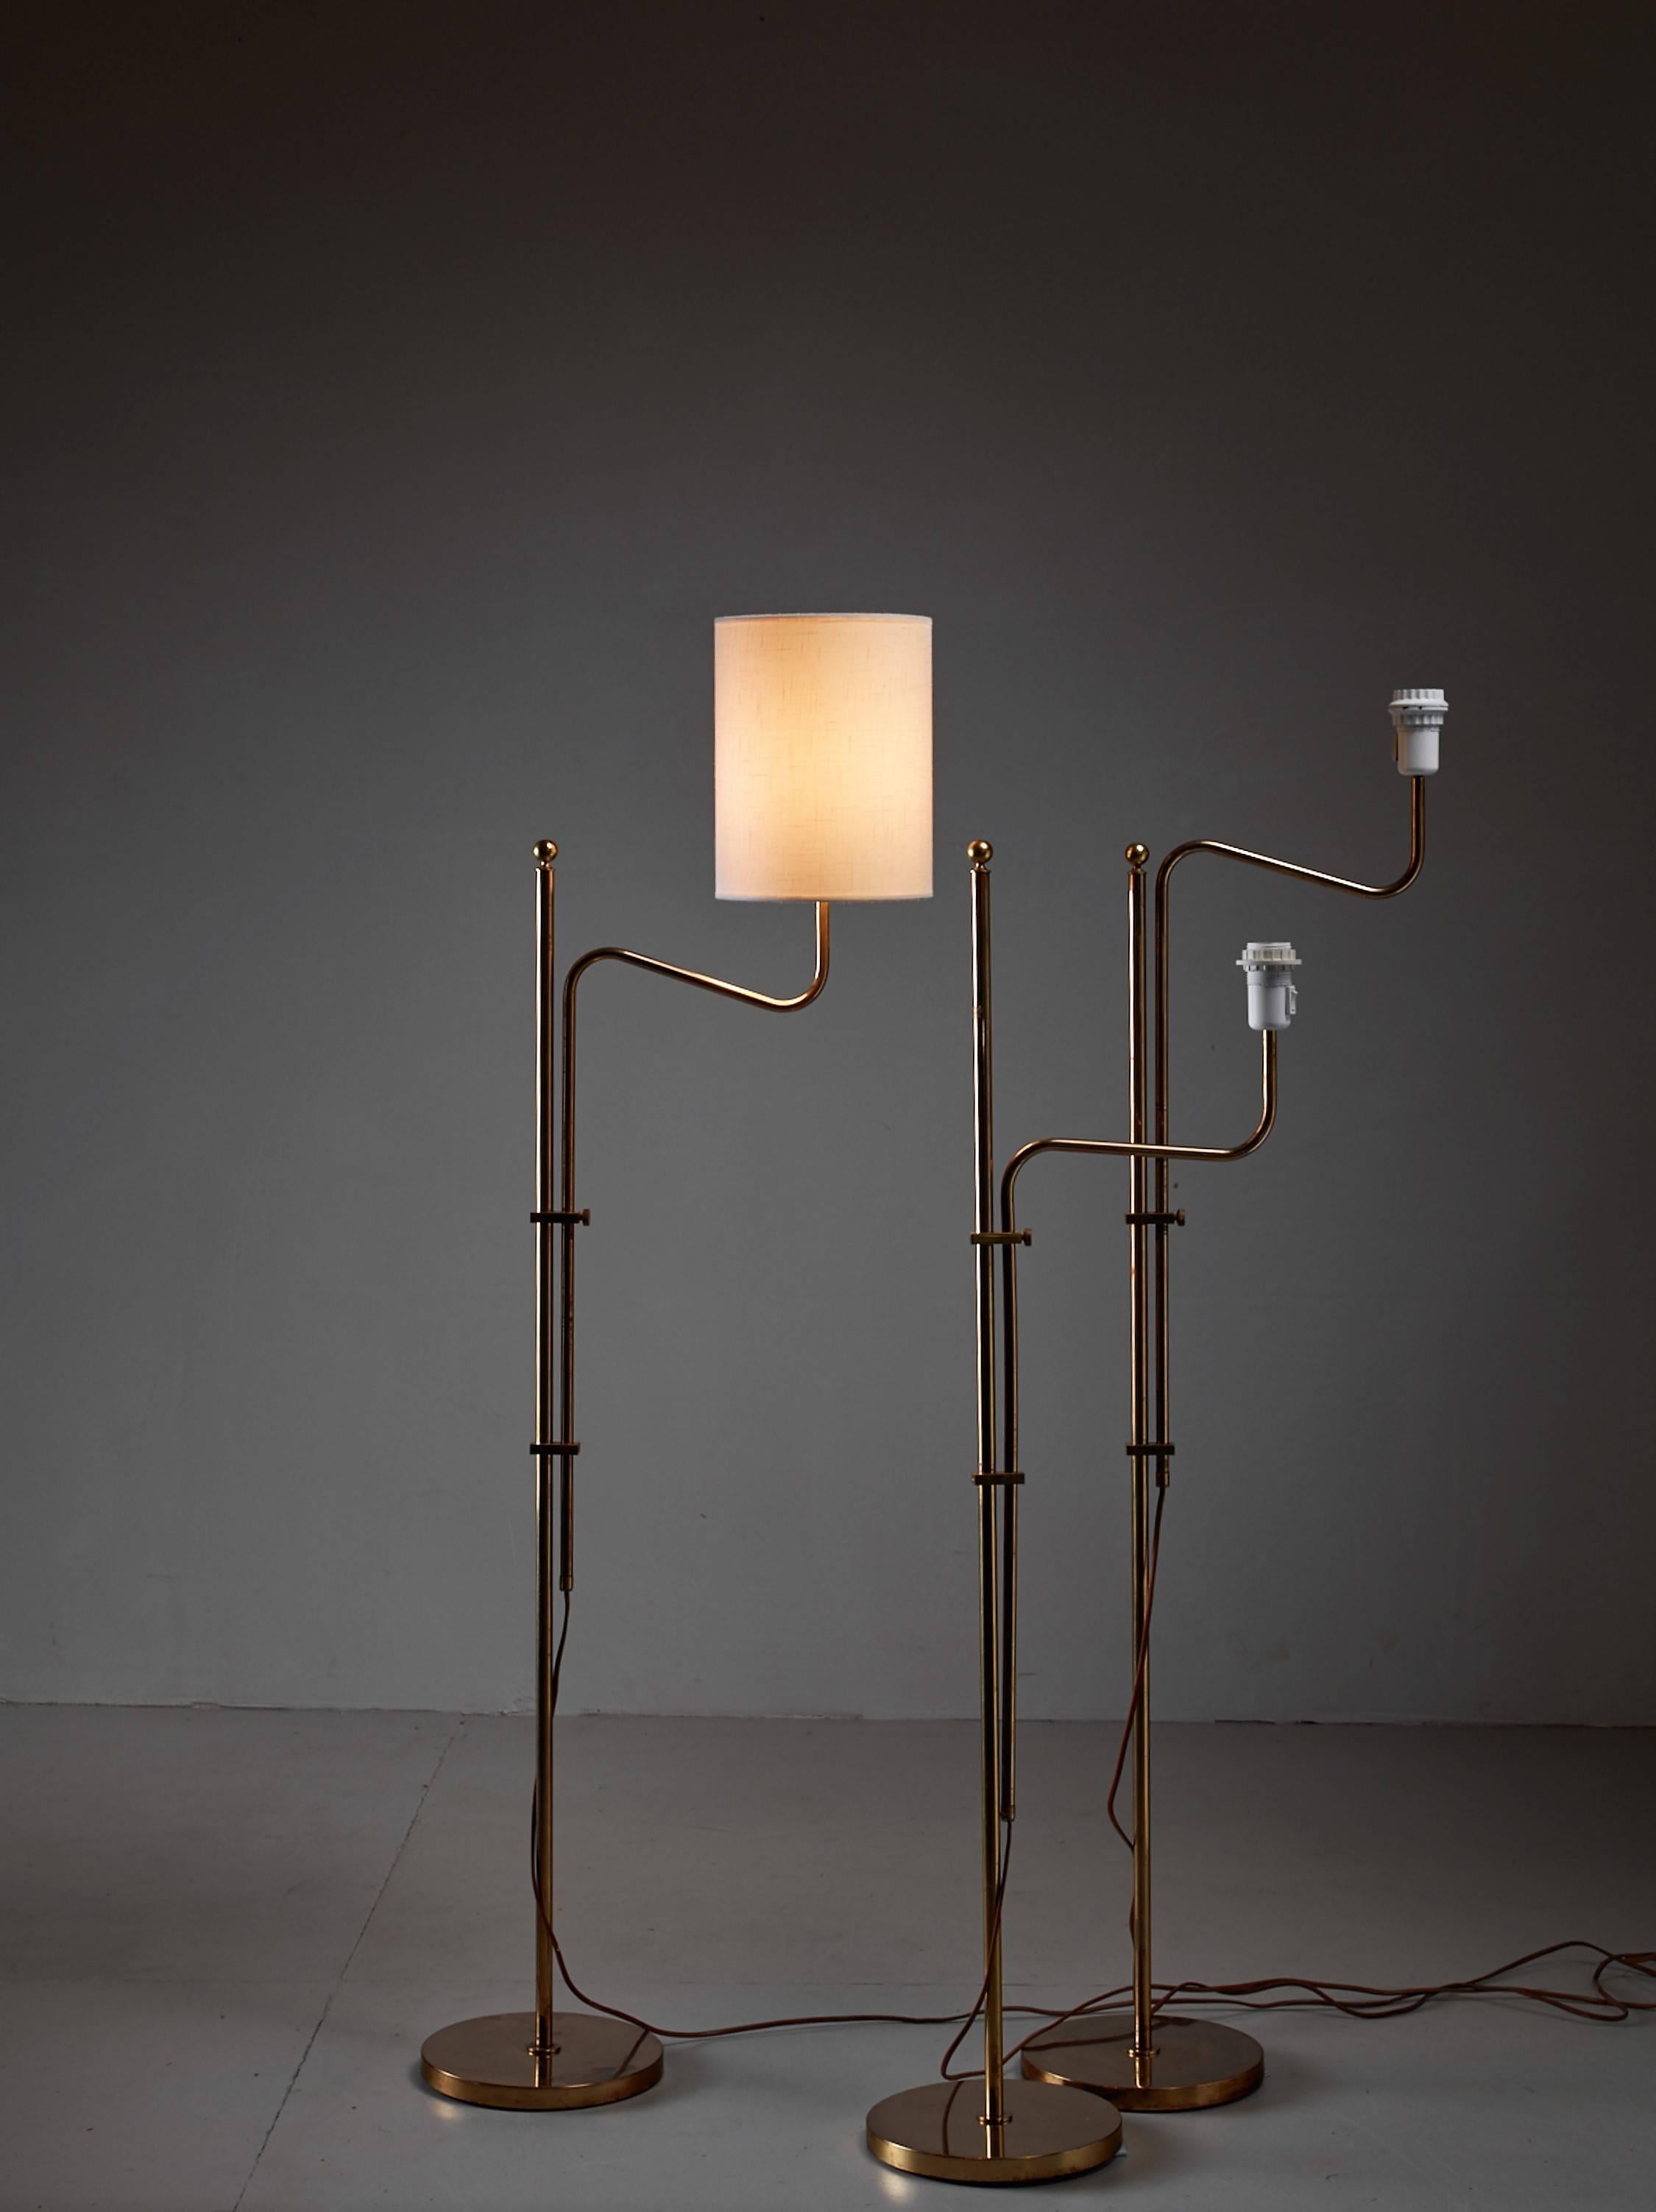 A set of three height-adjustable brass floor lamps by Bergboms. The stem holding the lightbulb can be adjusted between 104 and 138 cm.
Labelled by Bergboms and in a very good condition.

The measurements are of the lamps without a shade.